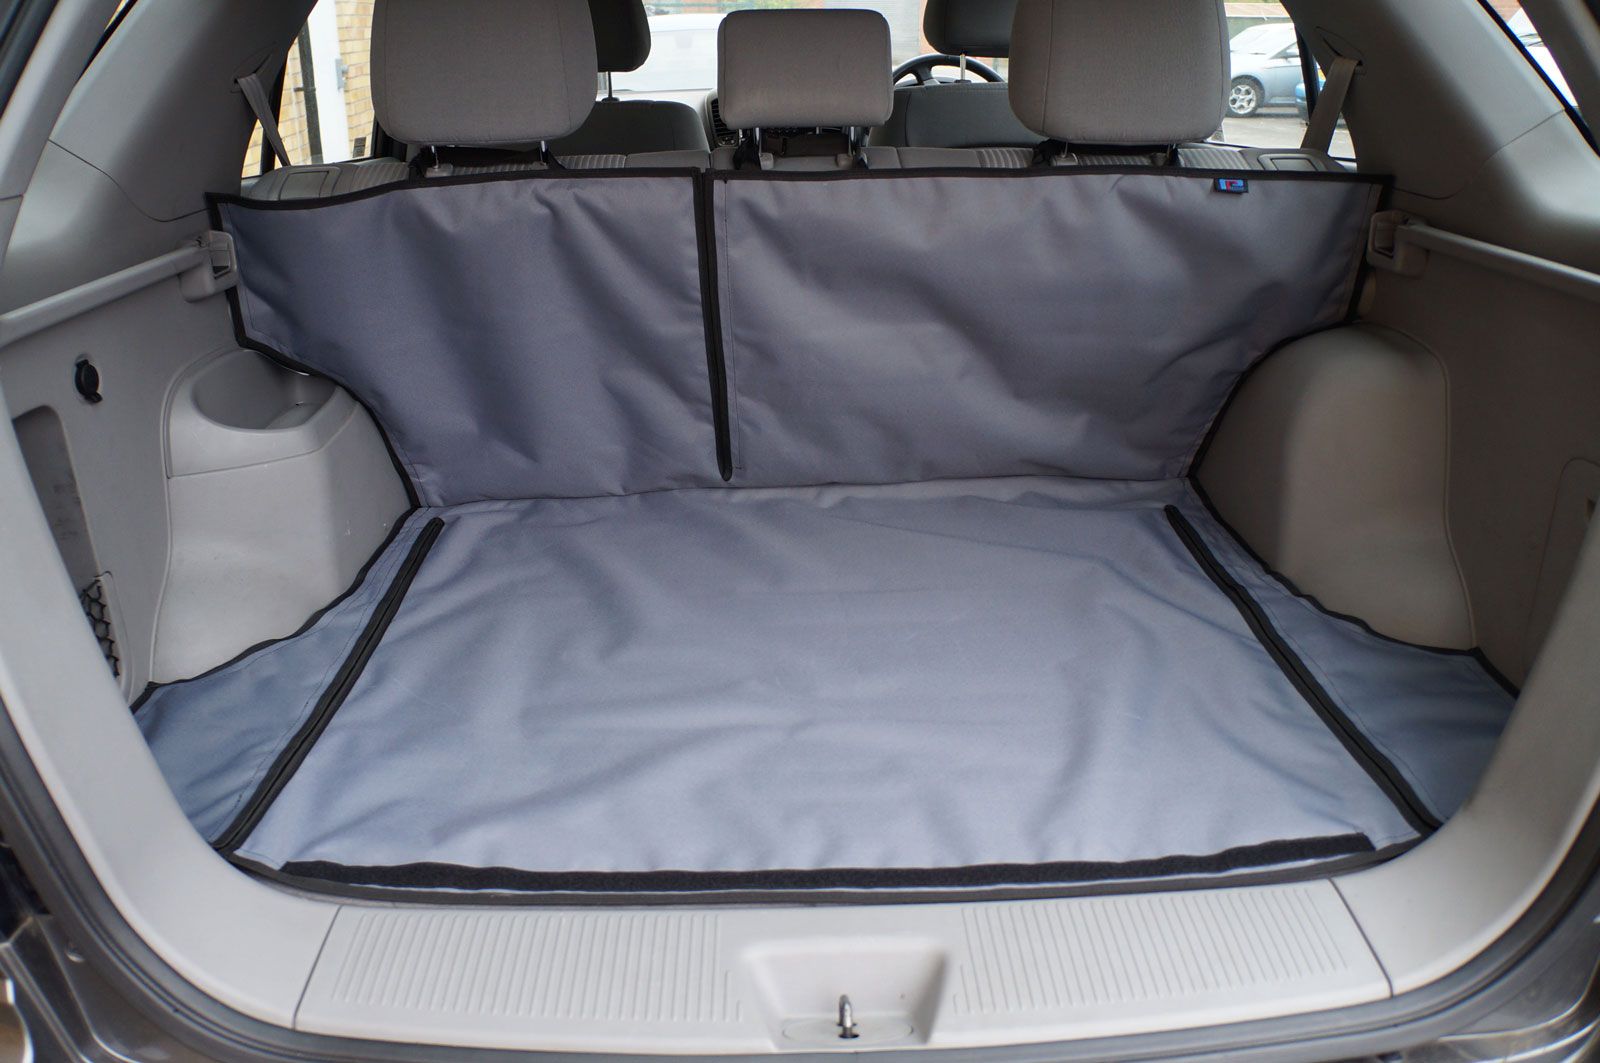 Ford Focus Estate 2005 - 2011 Fully Tailored Load Liner without bumper flap - Example